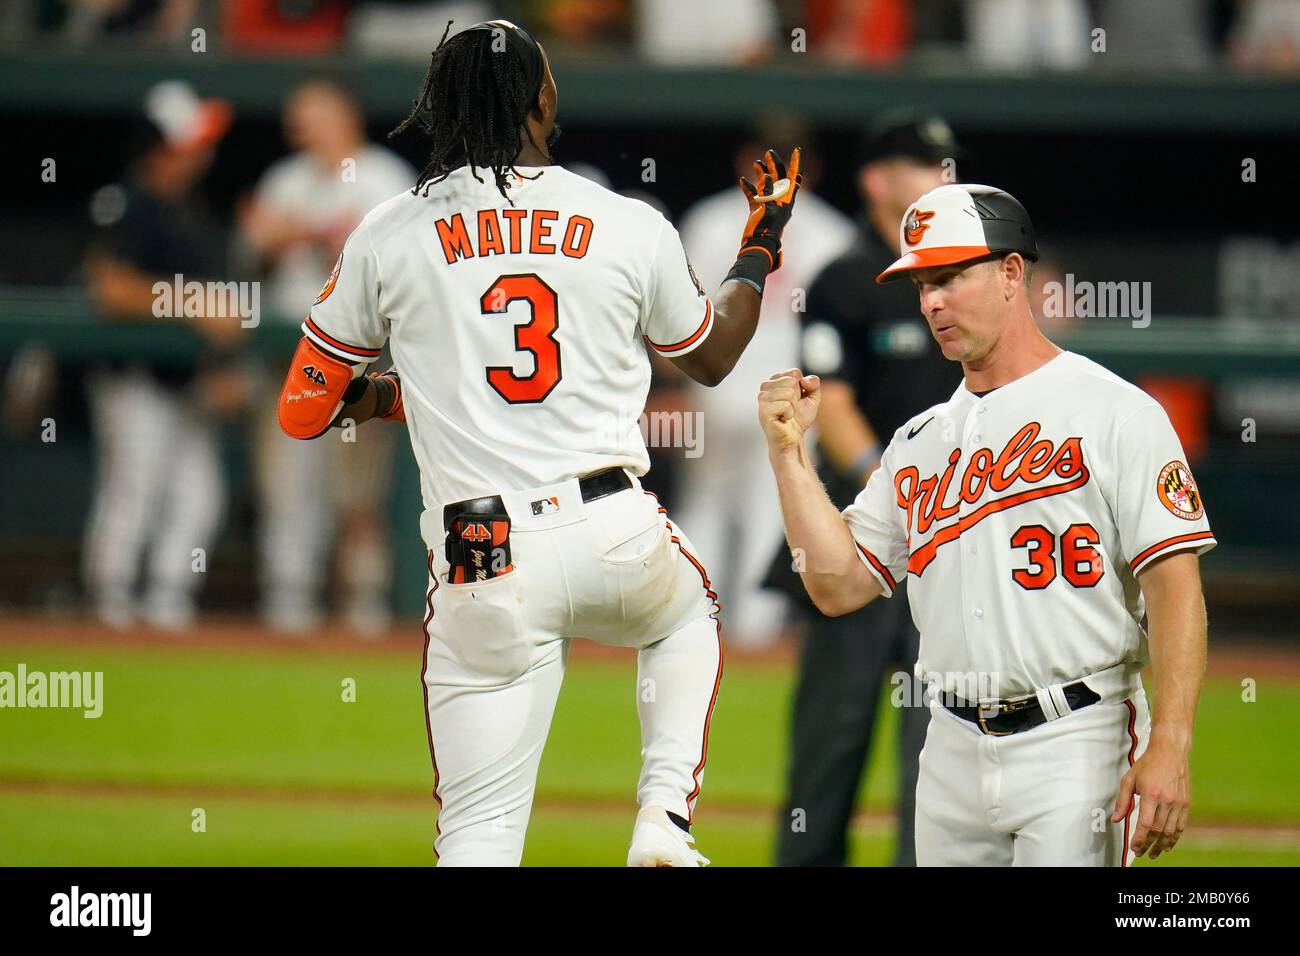 Baltimore Orioles' Jorge Mateo, left, reacts while running by